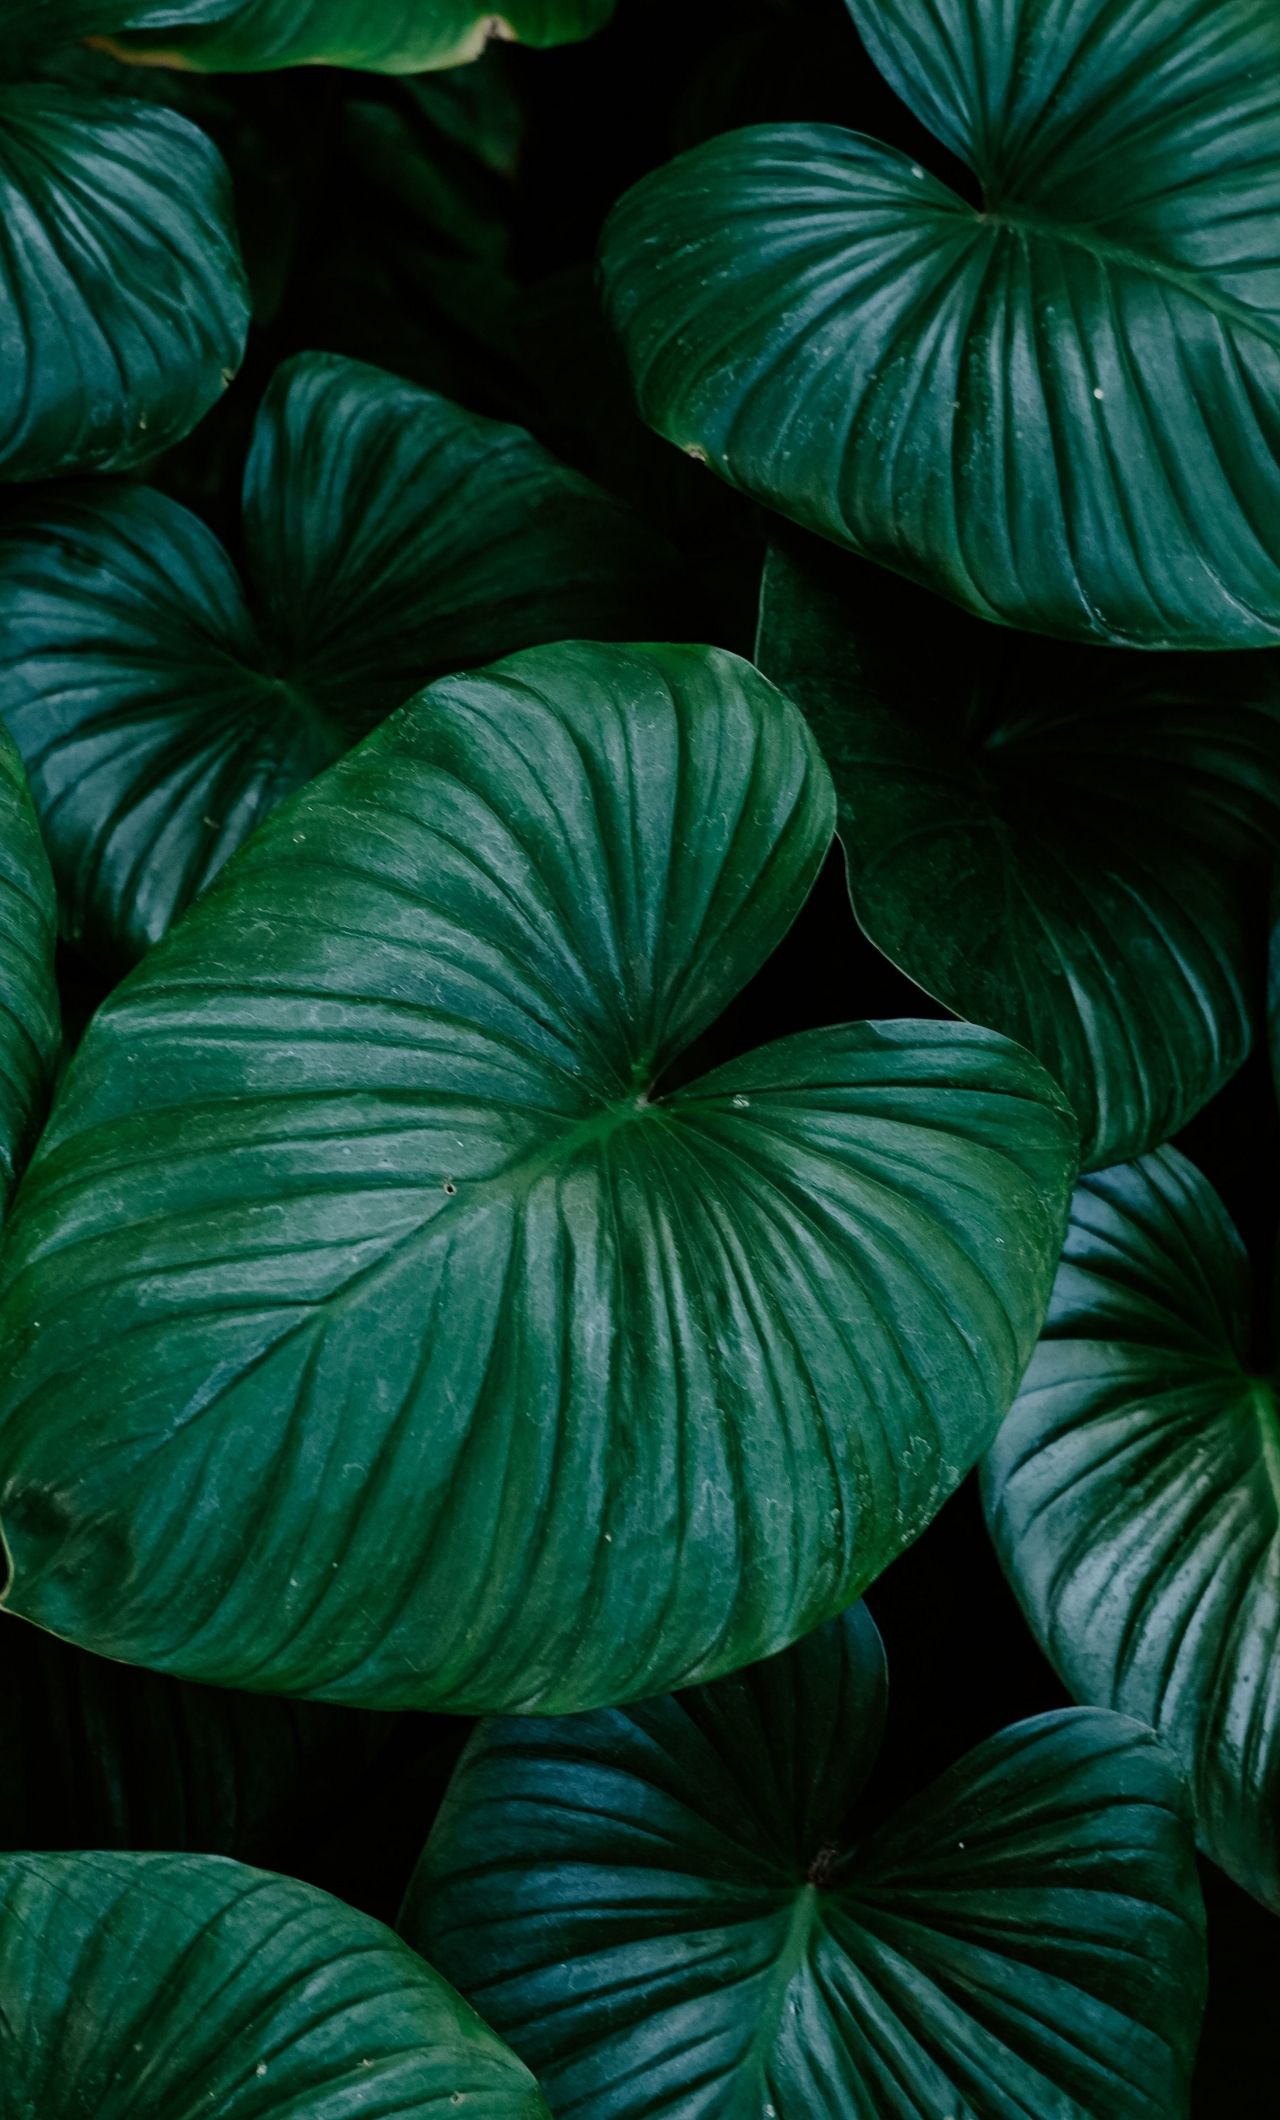 A close up of a green leafy plant - Leaves, bright, plants